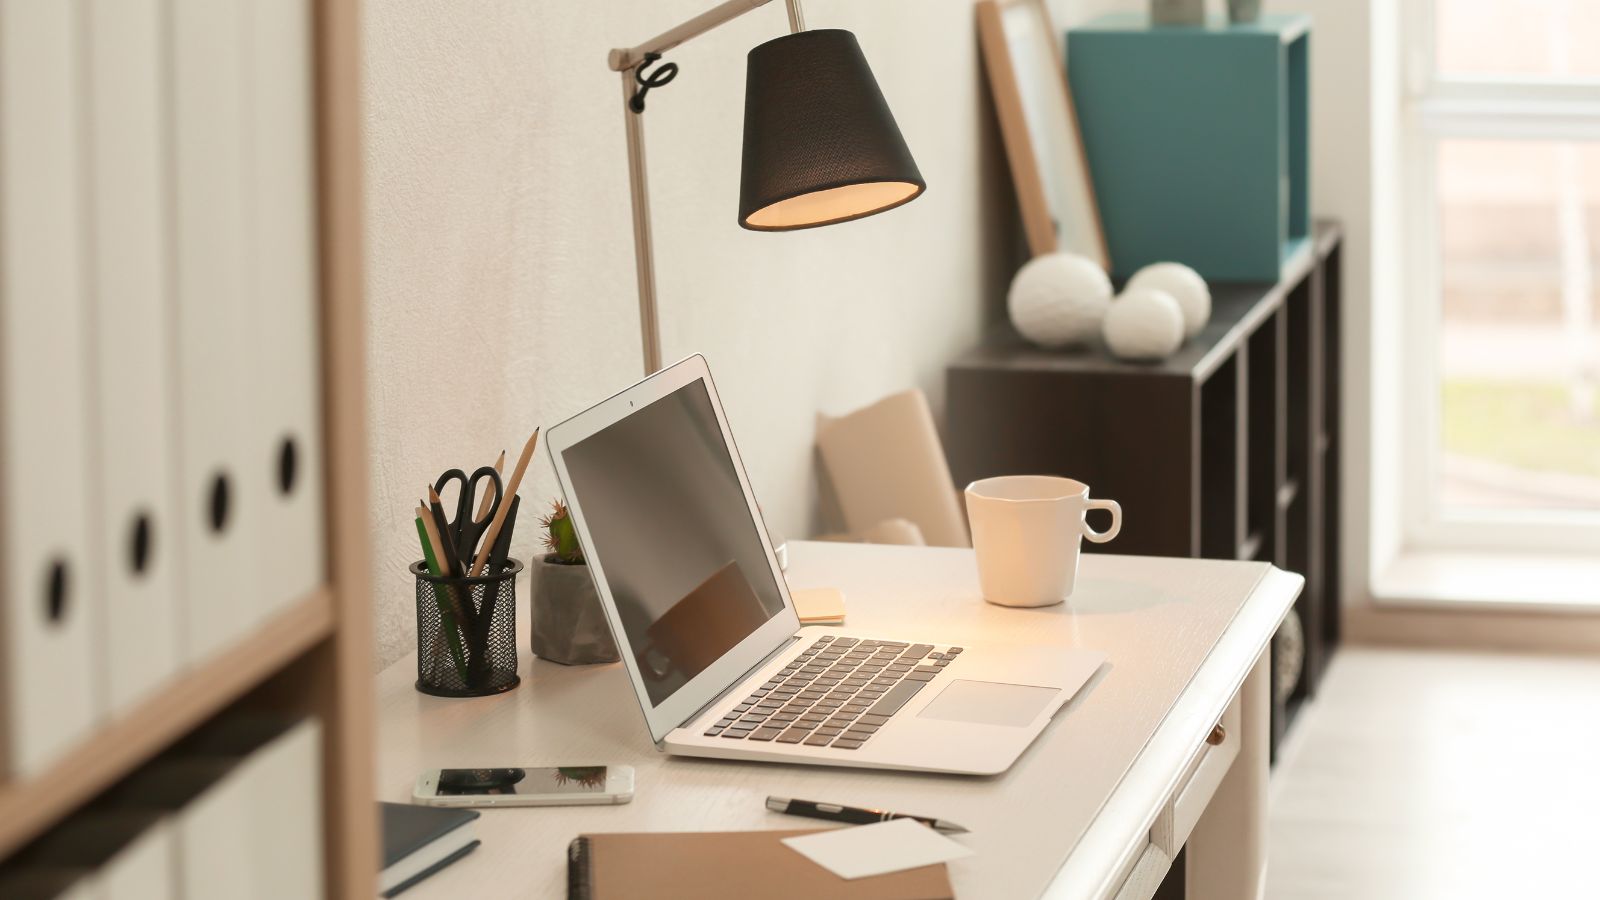 A home office featuring a laptop, coffee mug, and lamp on a desk